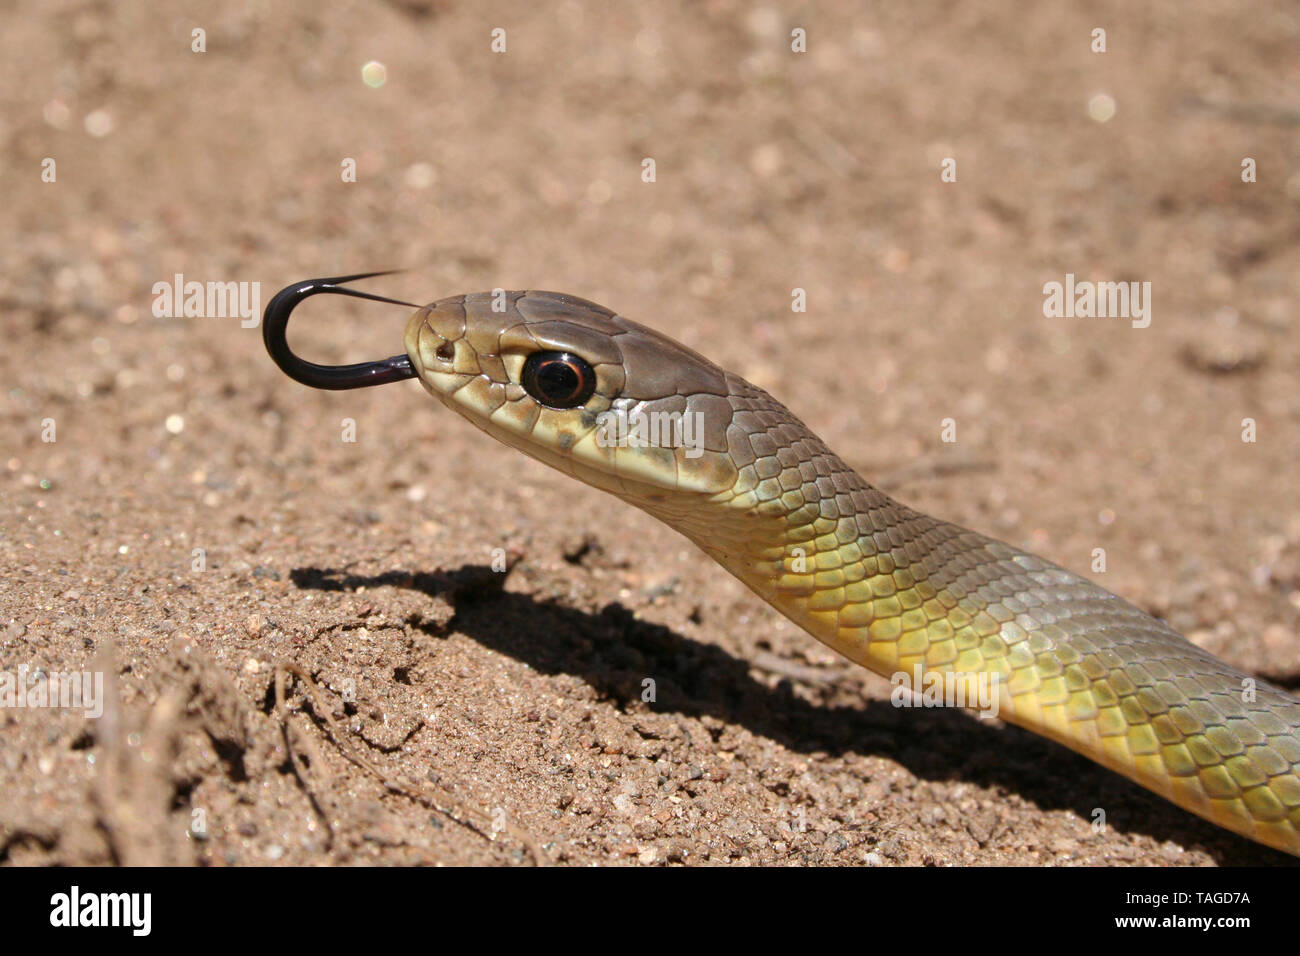 Western Yellow-bellied Racer Snake (Coluber constrictor mormon) Stock Photo